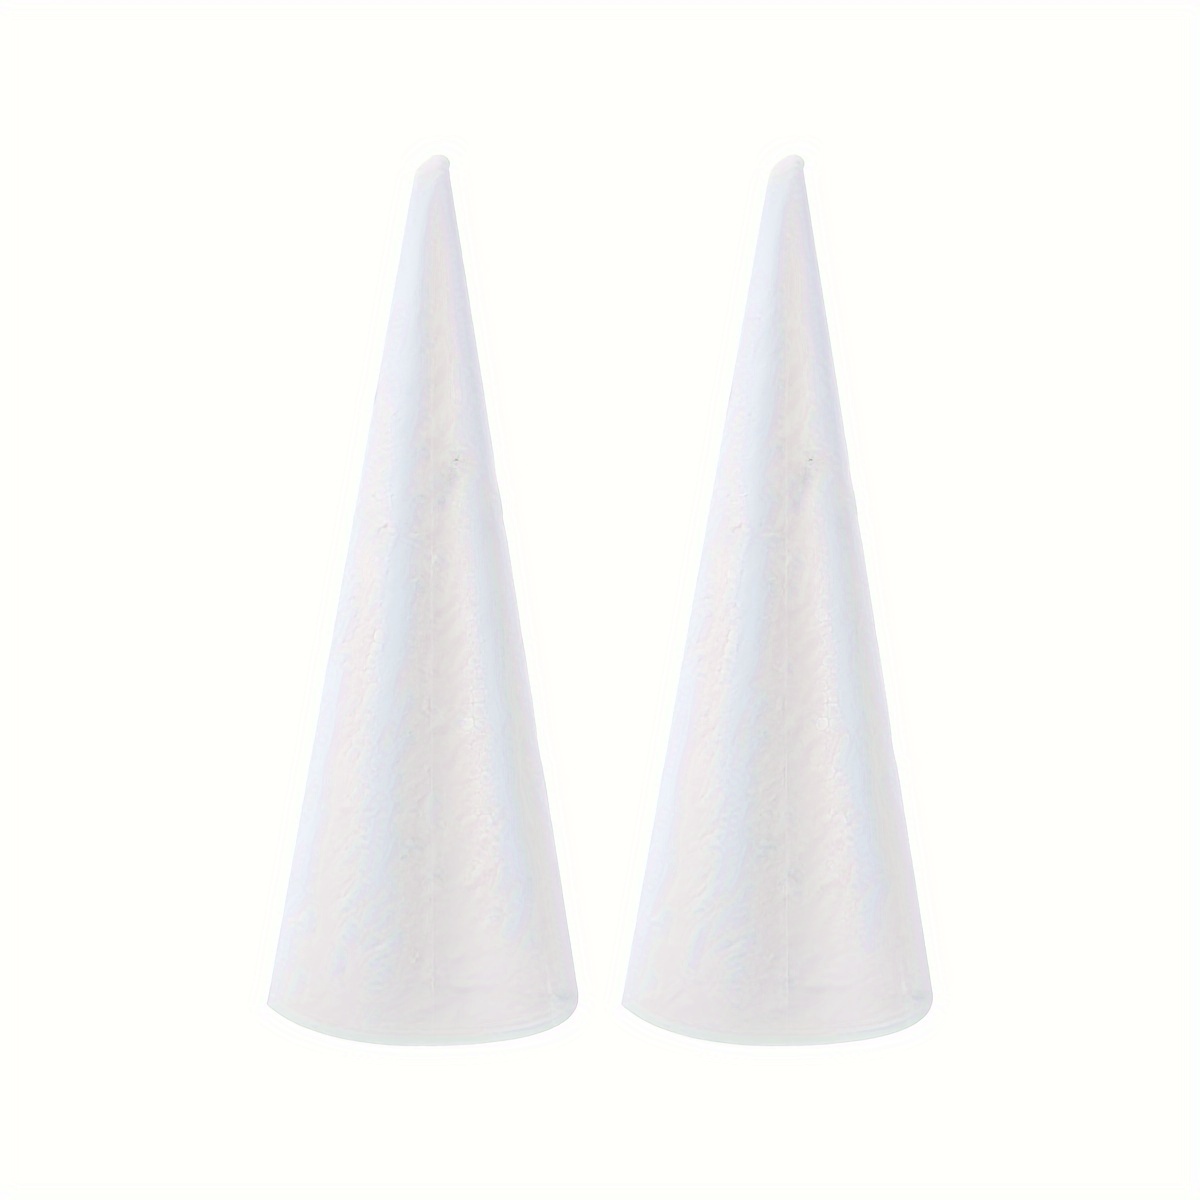 Foam Cones for DIY Crafts White Polystyrene Craft Foam Cones Craft  Decoration Foam Cones for DIY Art Craft, and School Projects - AliExpress